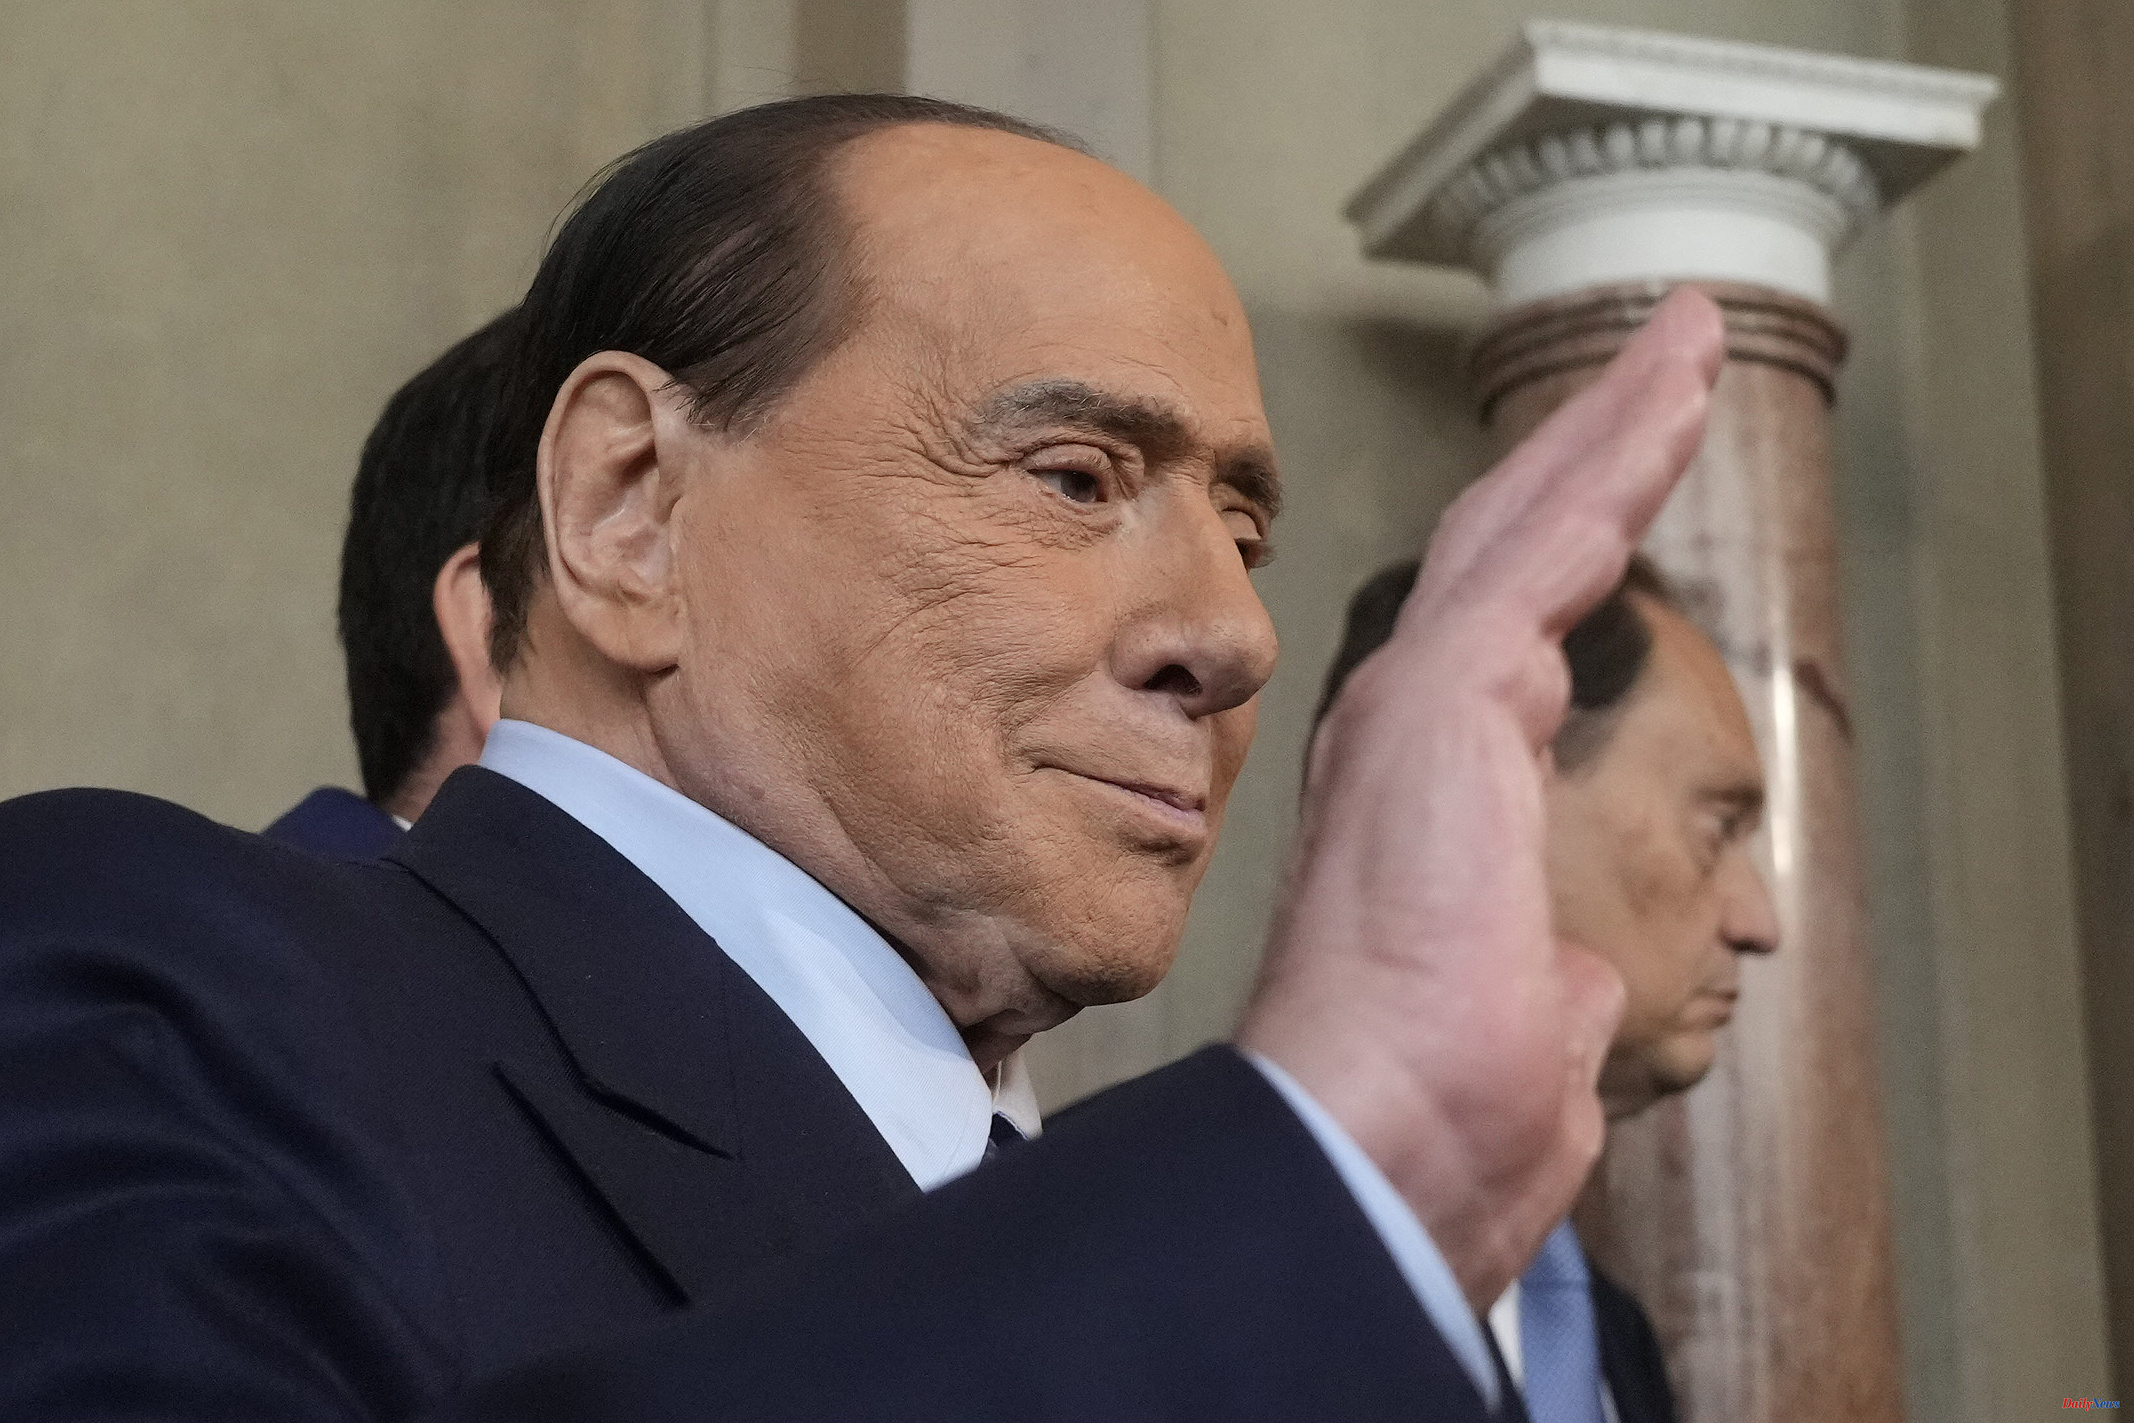 Italy "Improvement" by Berlusconi, who leaves Intensive Care although he is still admitted